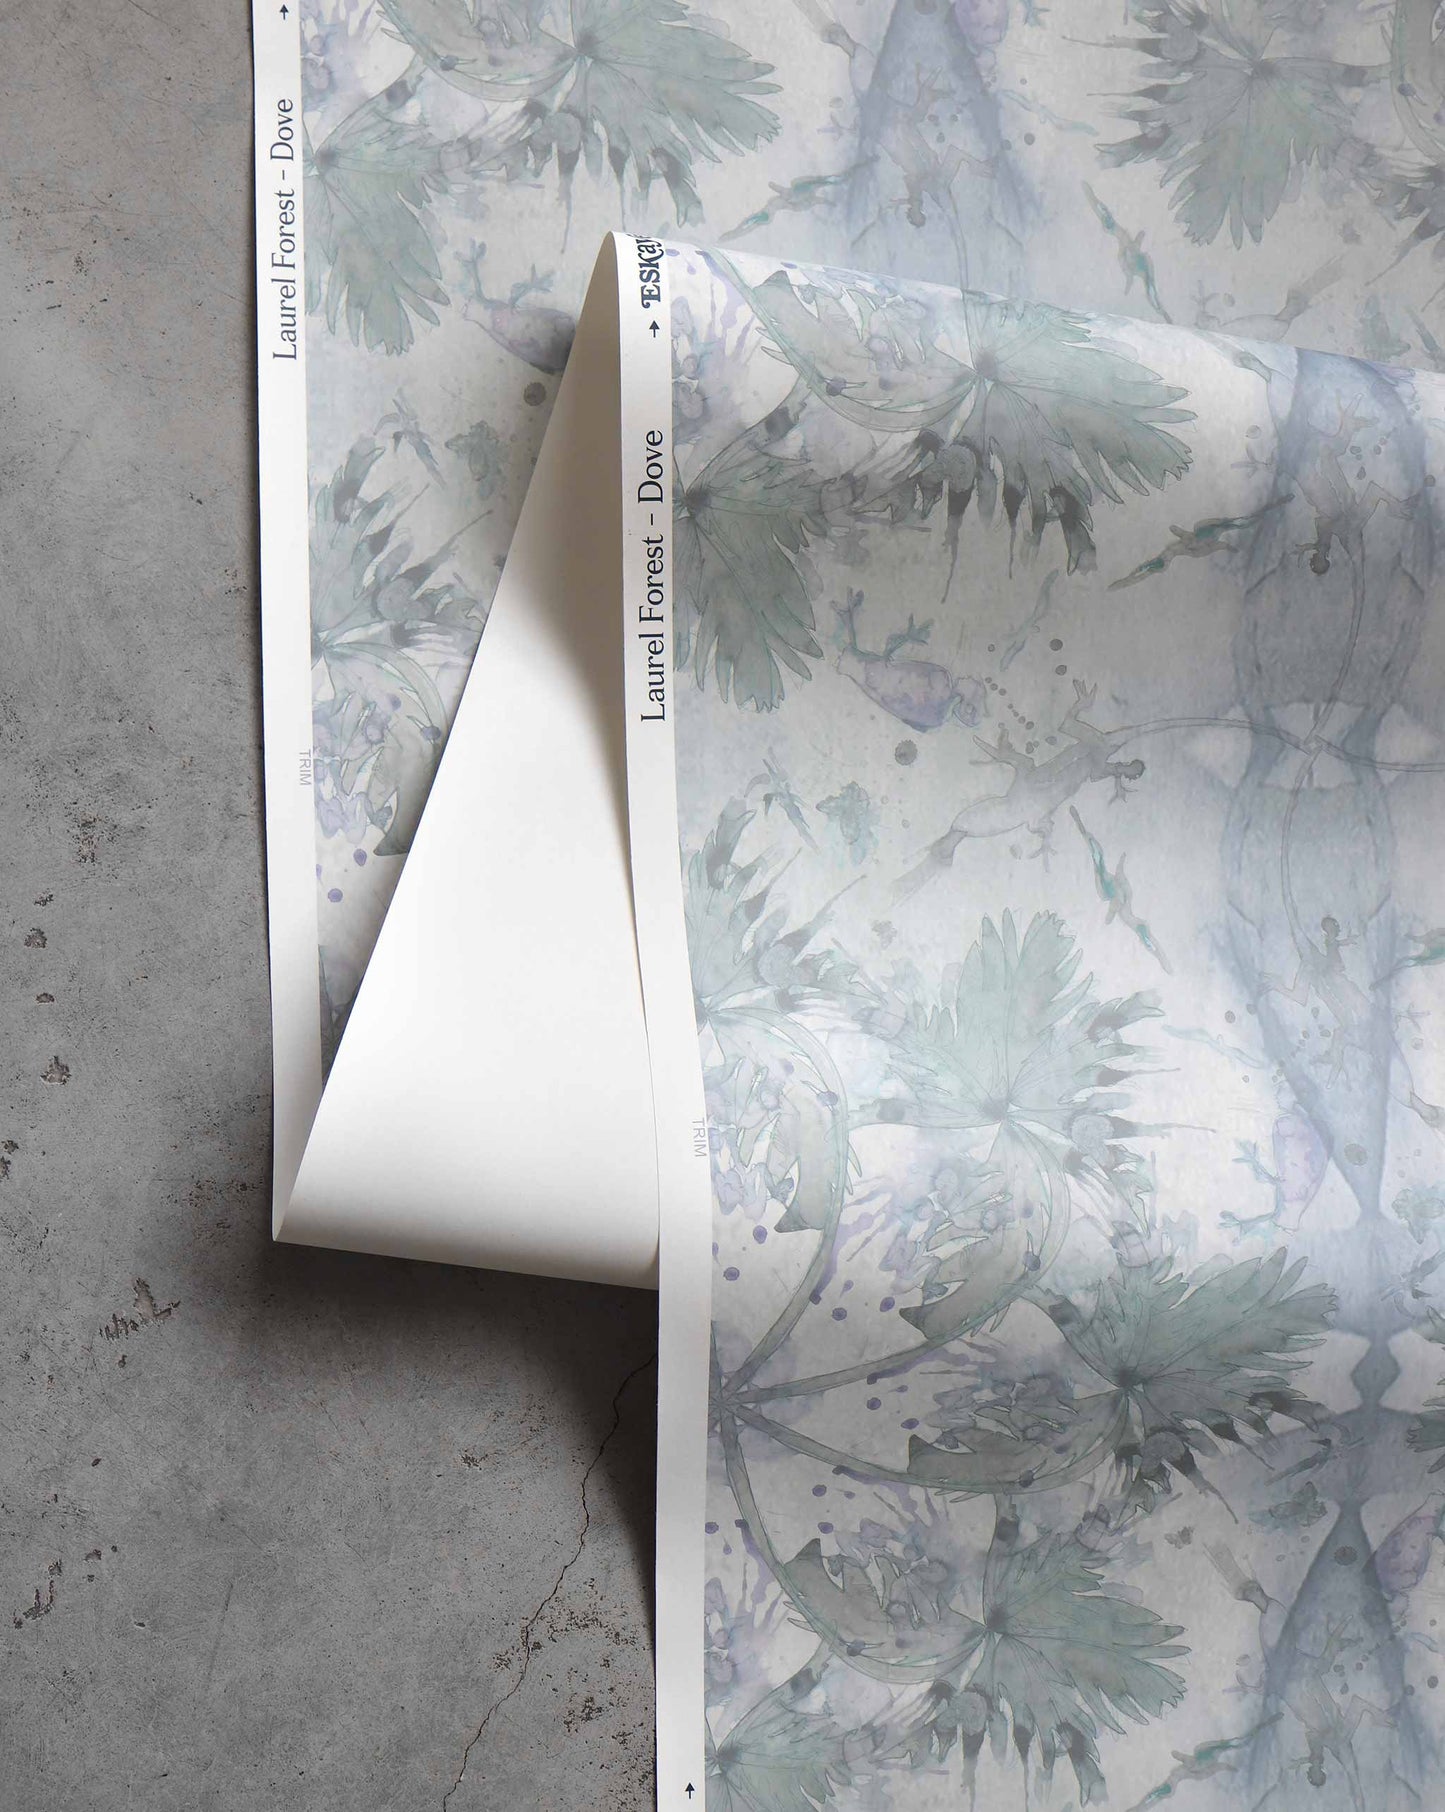 A roll of wallpaper partially unrolled, featuring a light floral pattern with leaves and branches, lies on a concrete surface. The edge reads "Laurel Forest Wallpaper||Dove," evoking a tropical atmosphere.